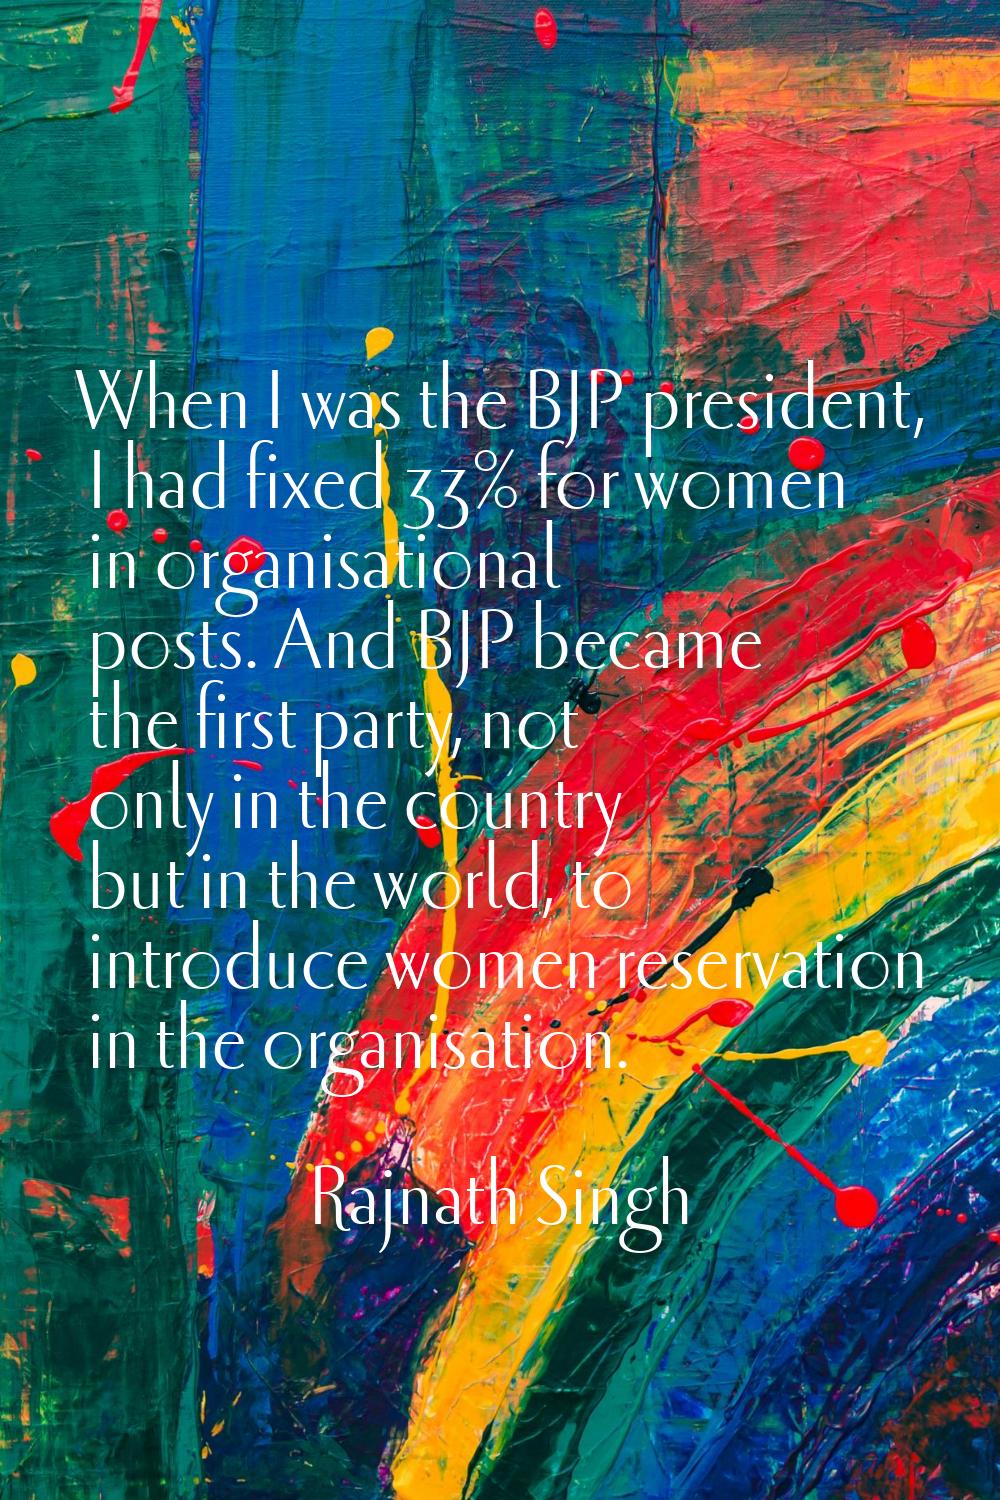 When I was the BJP president, I had fixed 33% for women in organisational posts. And BJP became the